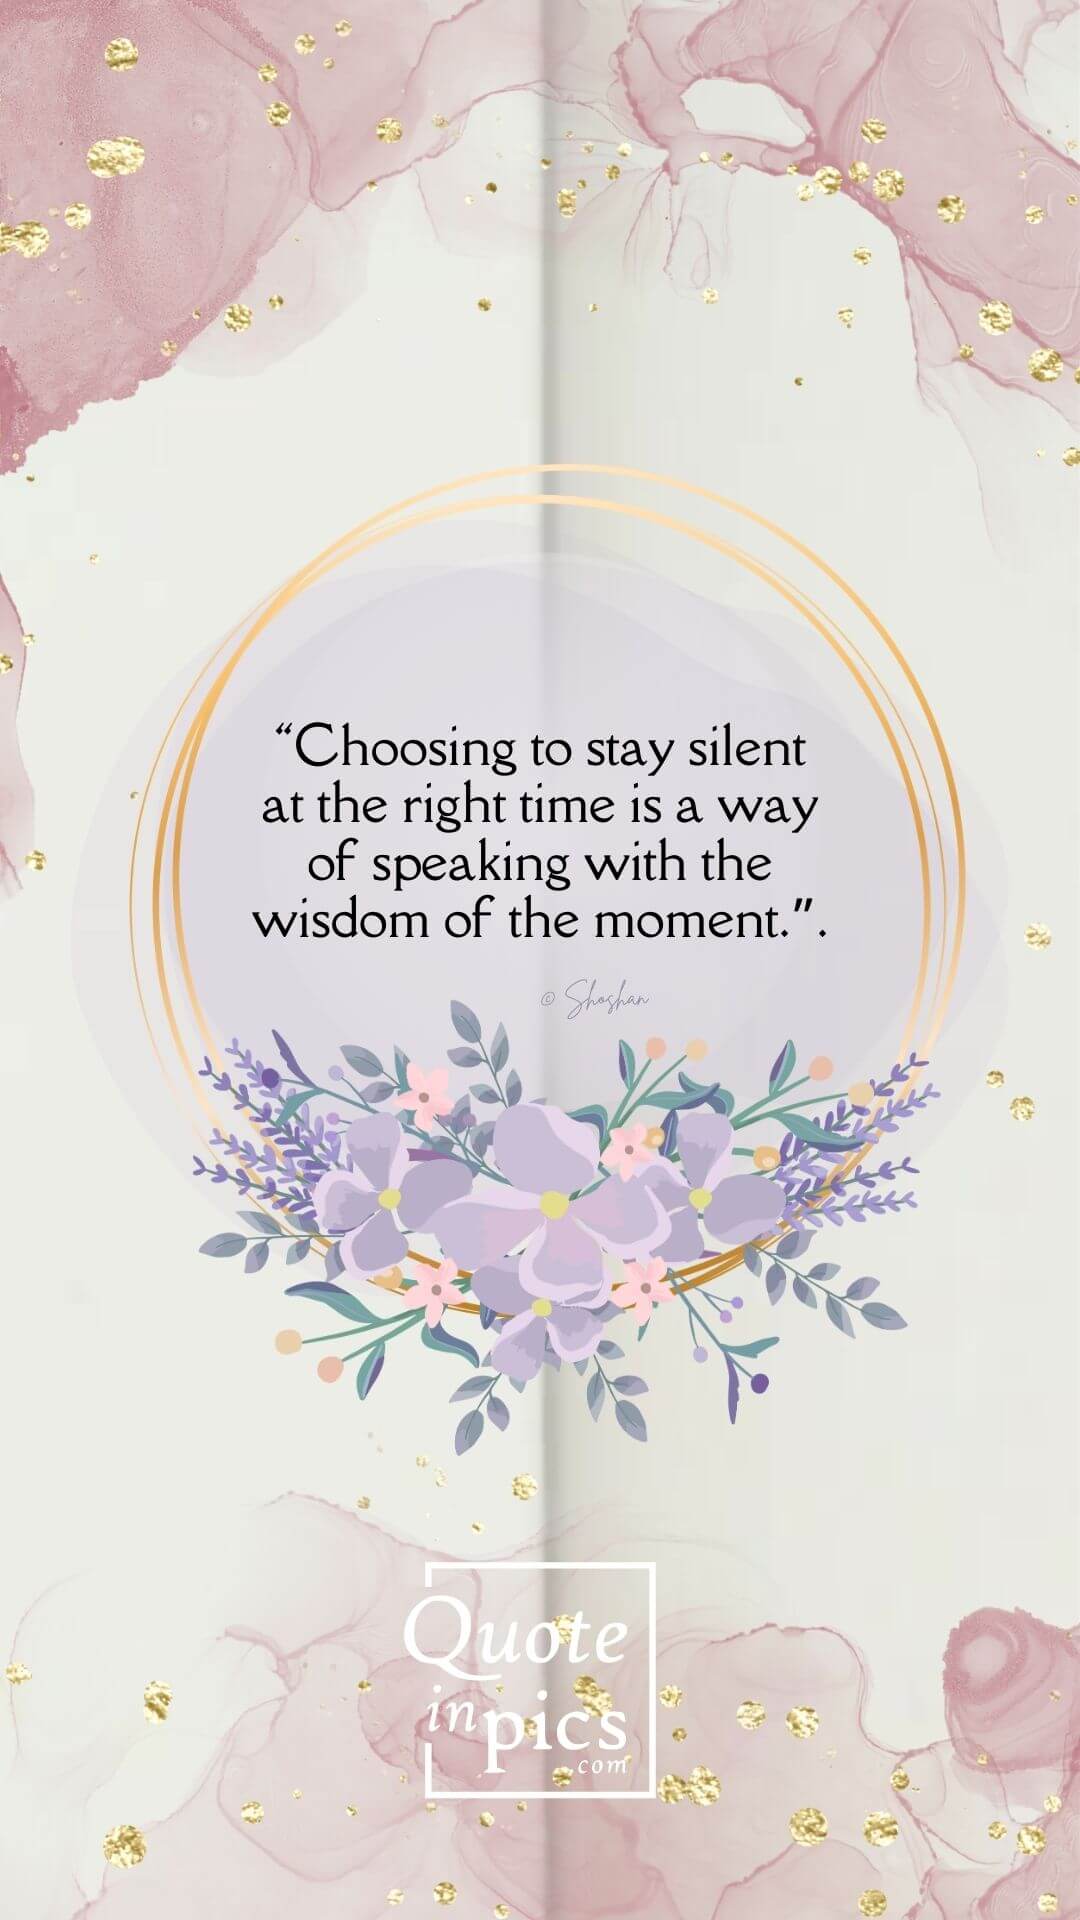 Choosing to stay silent at the right time is a way of speaking with the wisdom of the moment